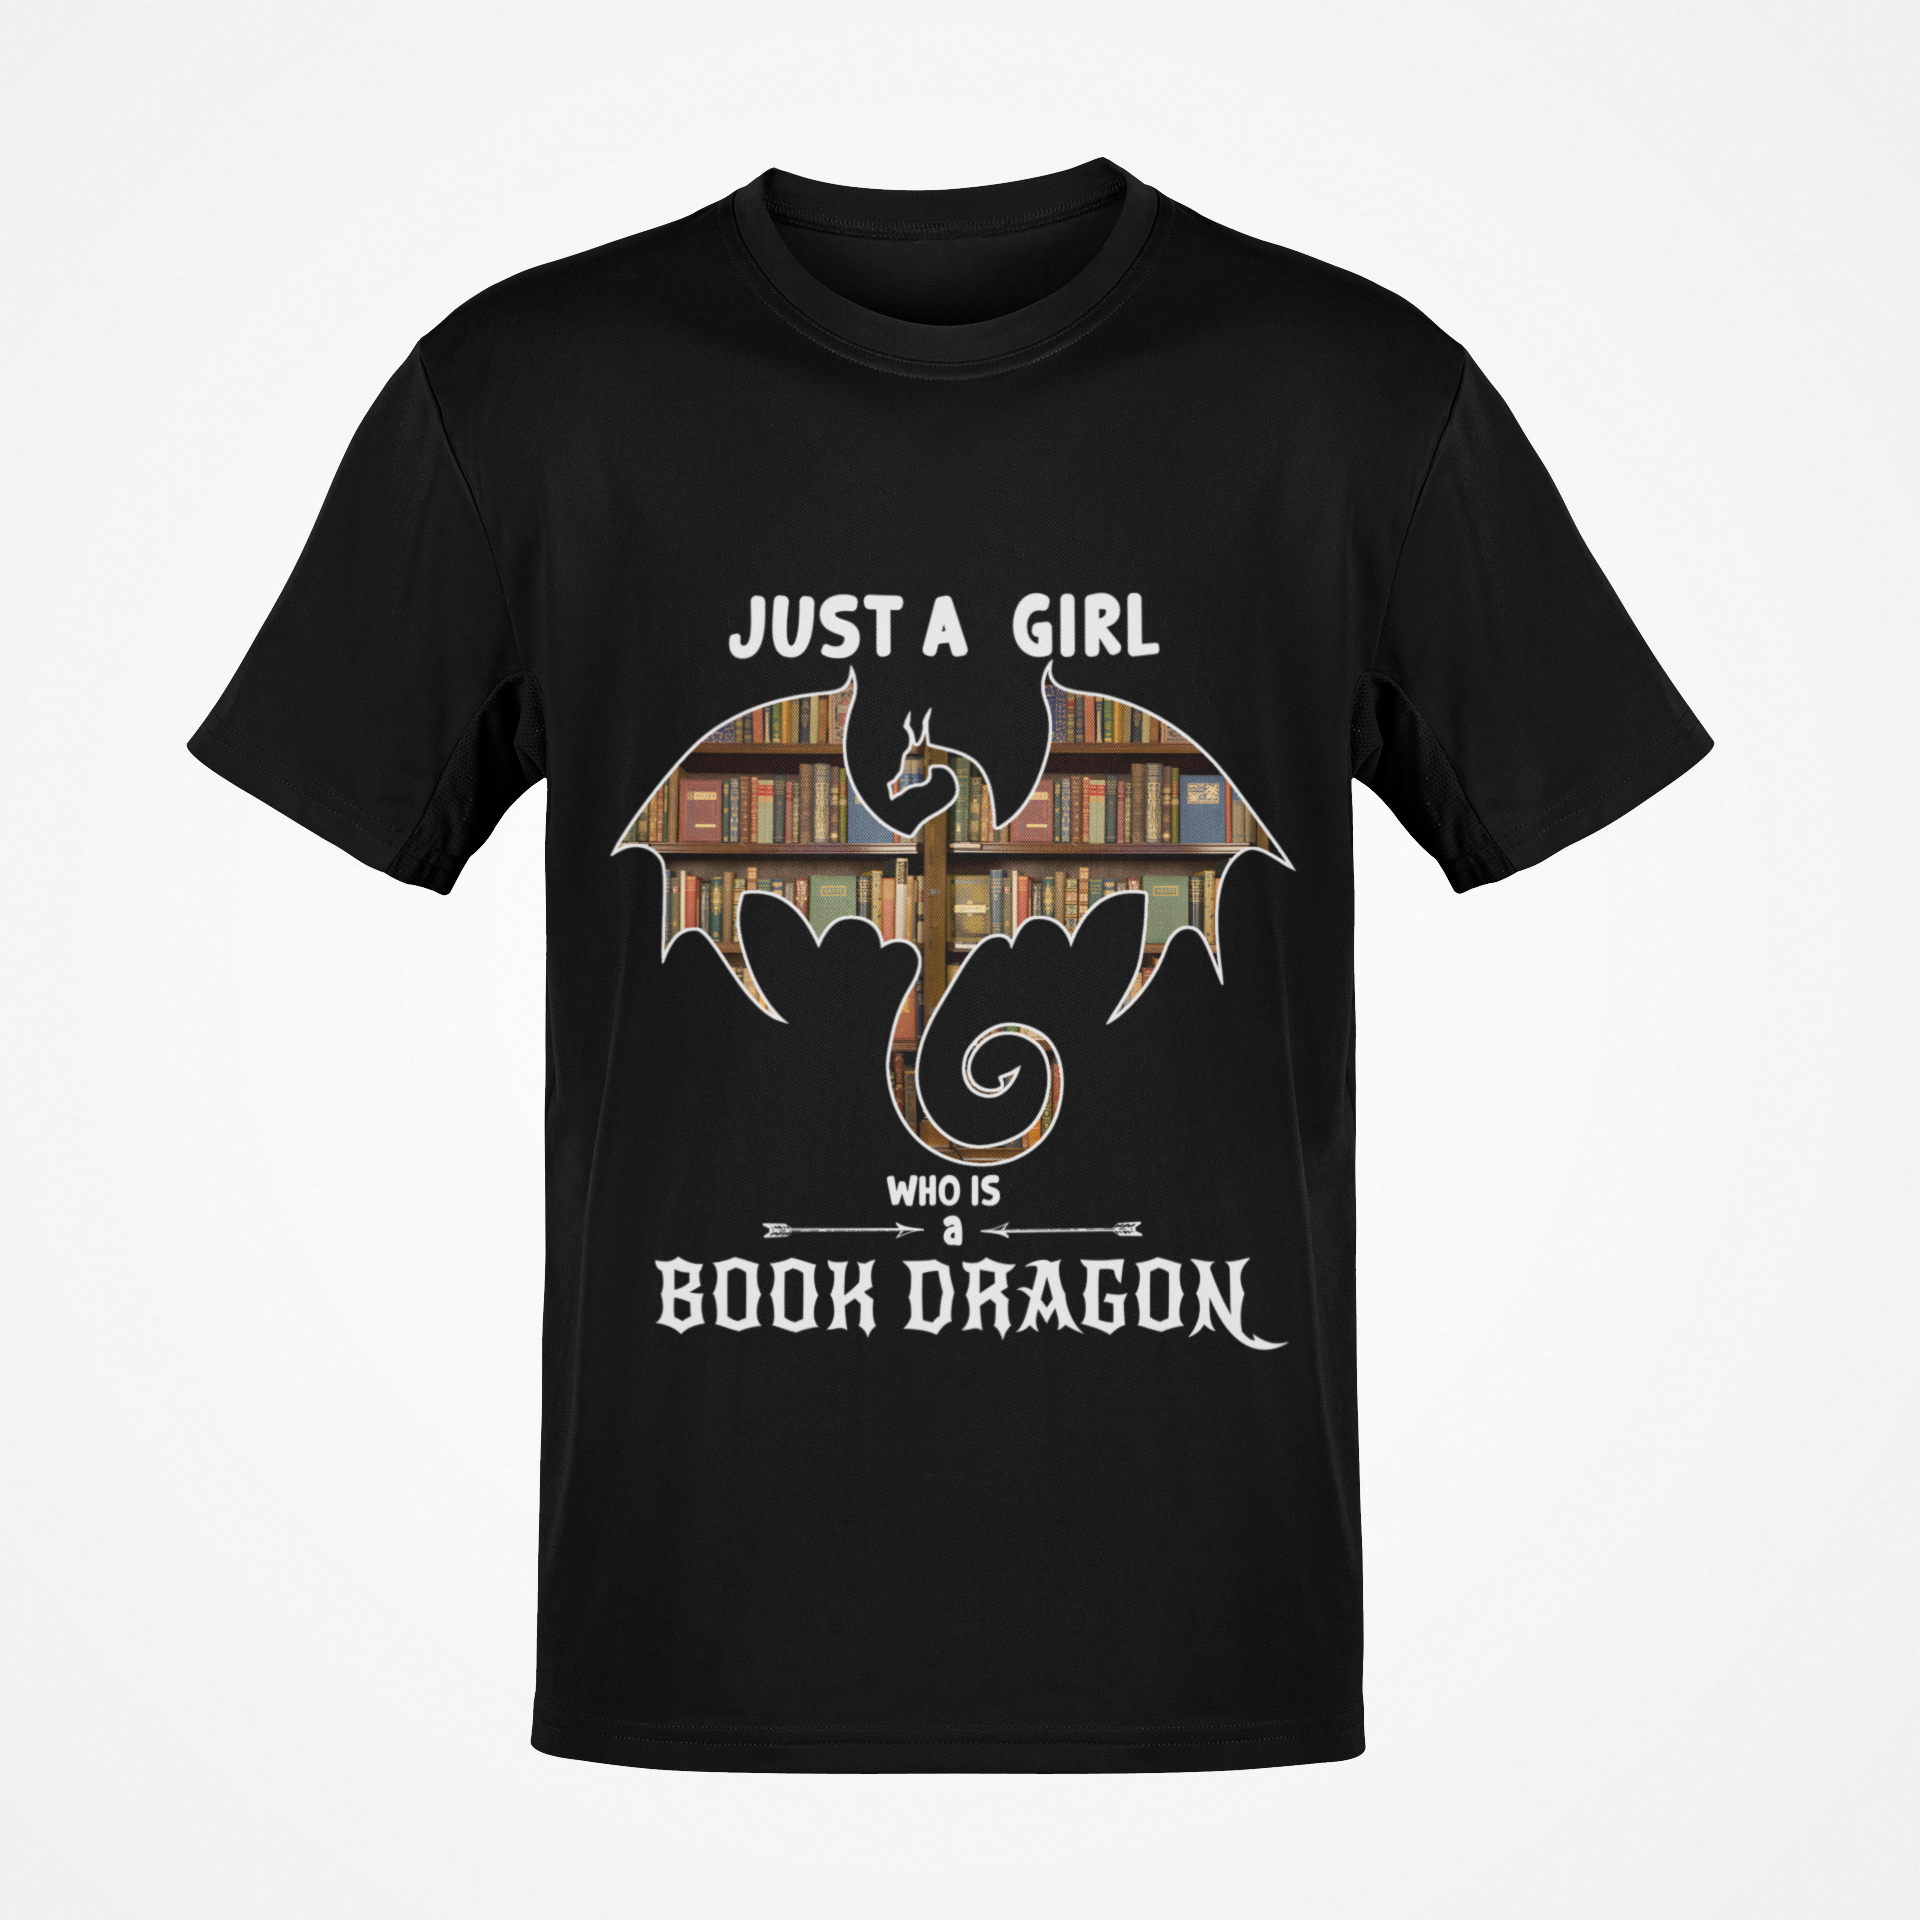 Just A Girl Who Is A Book Dragon T-shirt